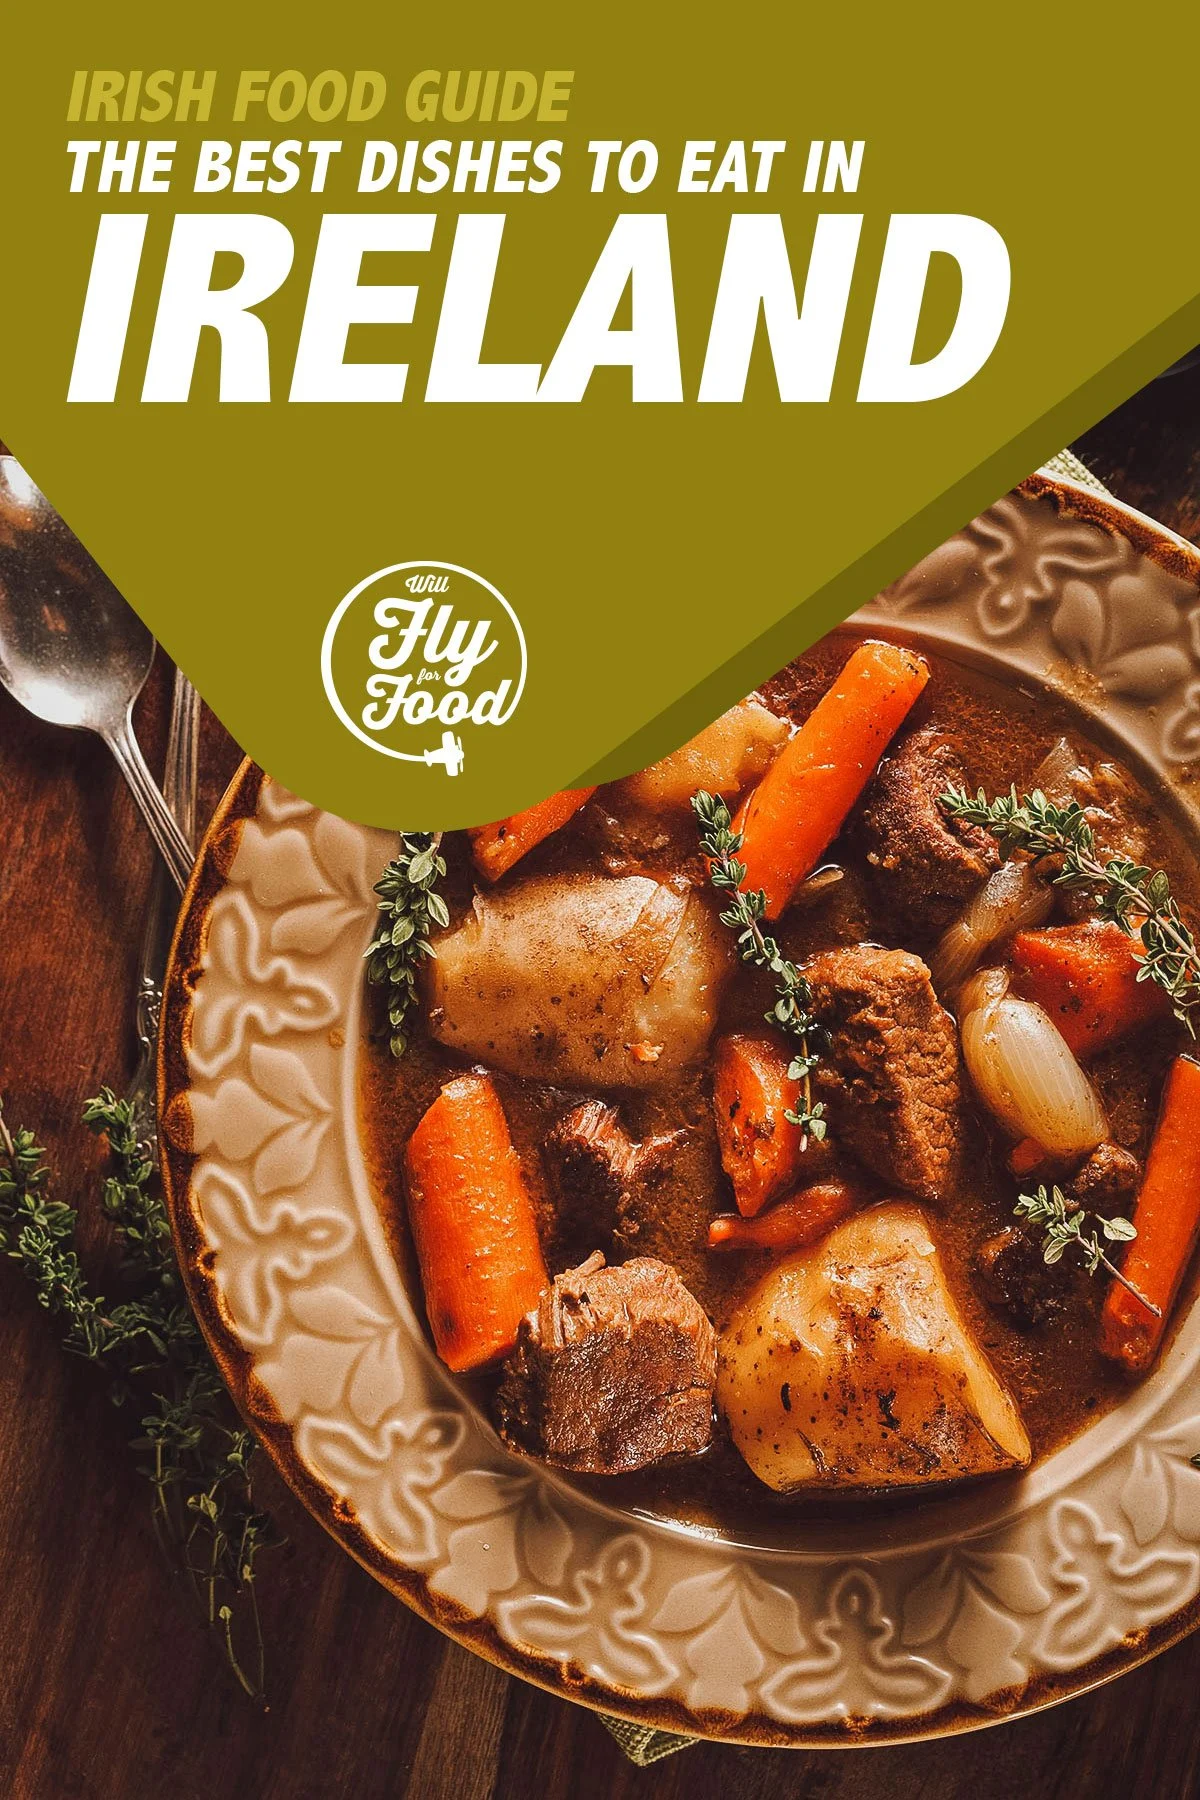 Irish stew, one of the best examples of traditional Irish food